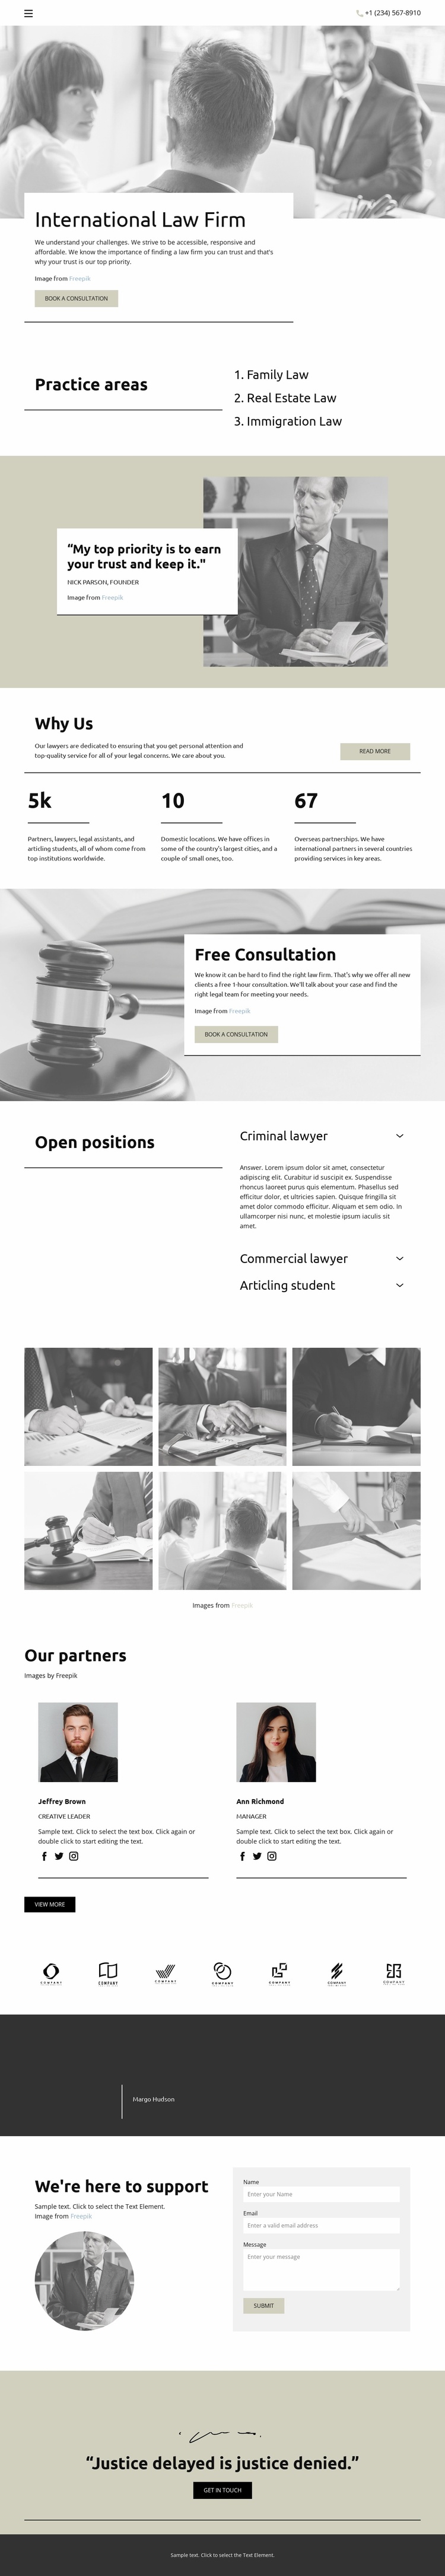 International Law Firm eCommerce Template